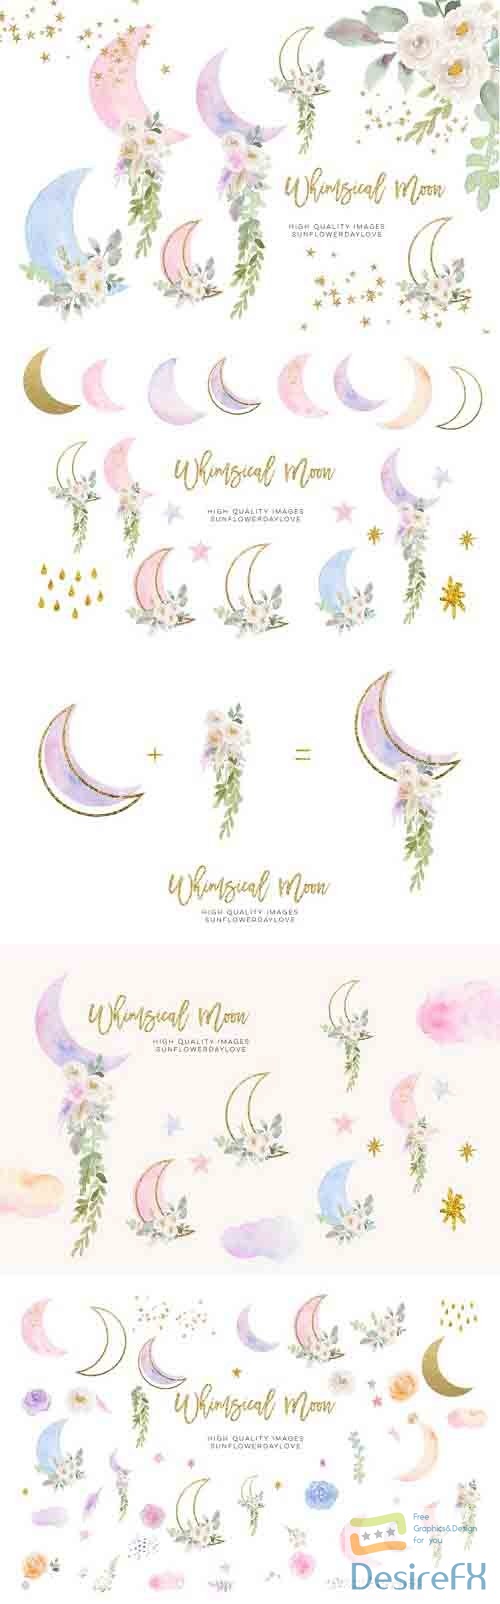 Moon Clouds Stars clipart, Greenery Gold Glitter Whimsical - 1243212